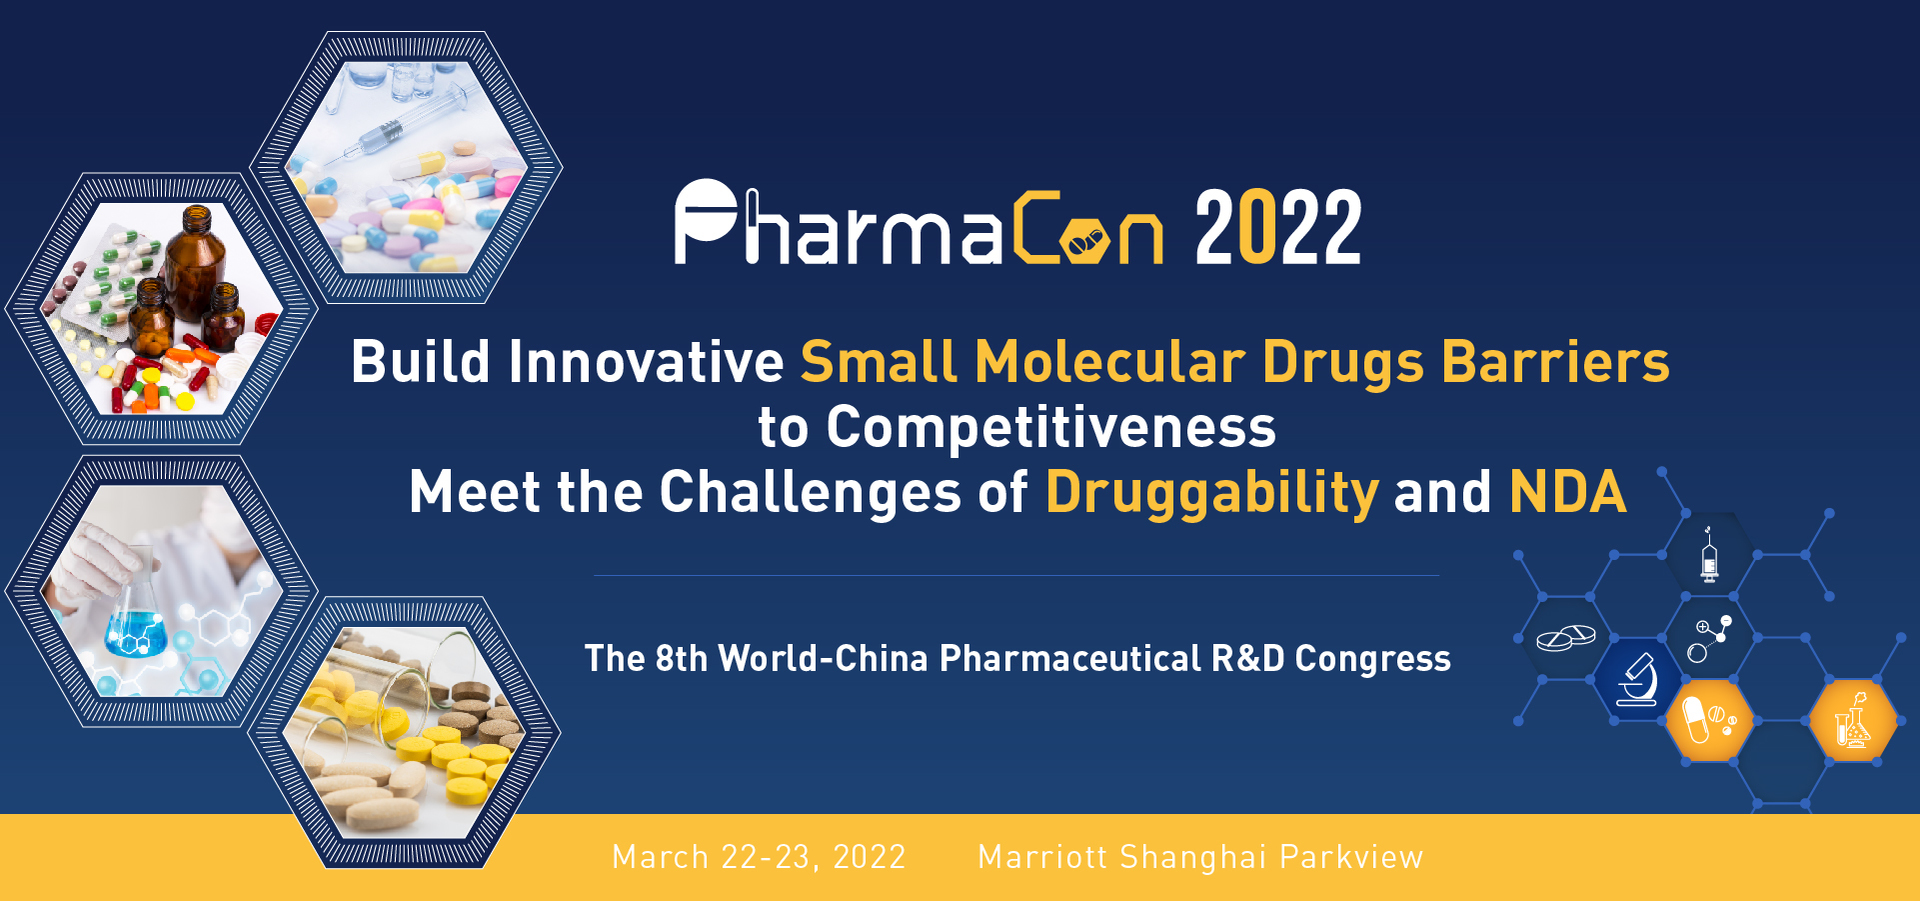 The 8th World-China  Pharmaceutical R&D Congress